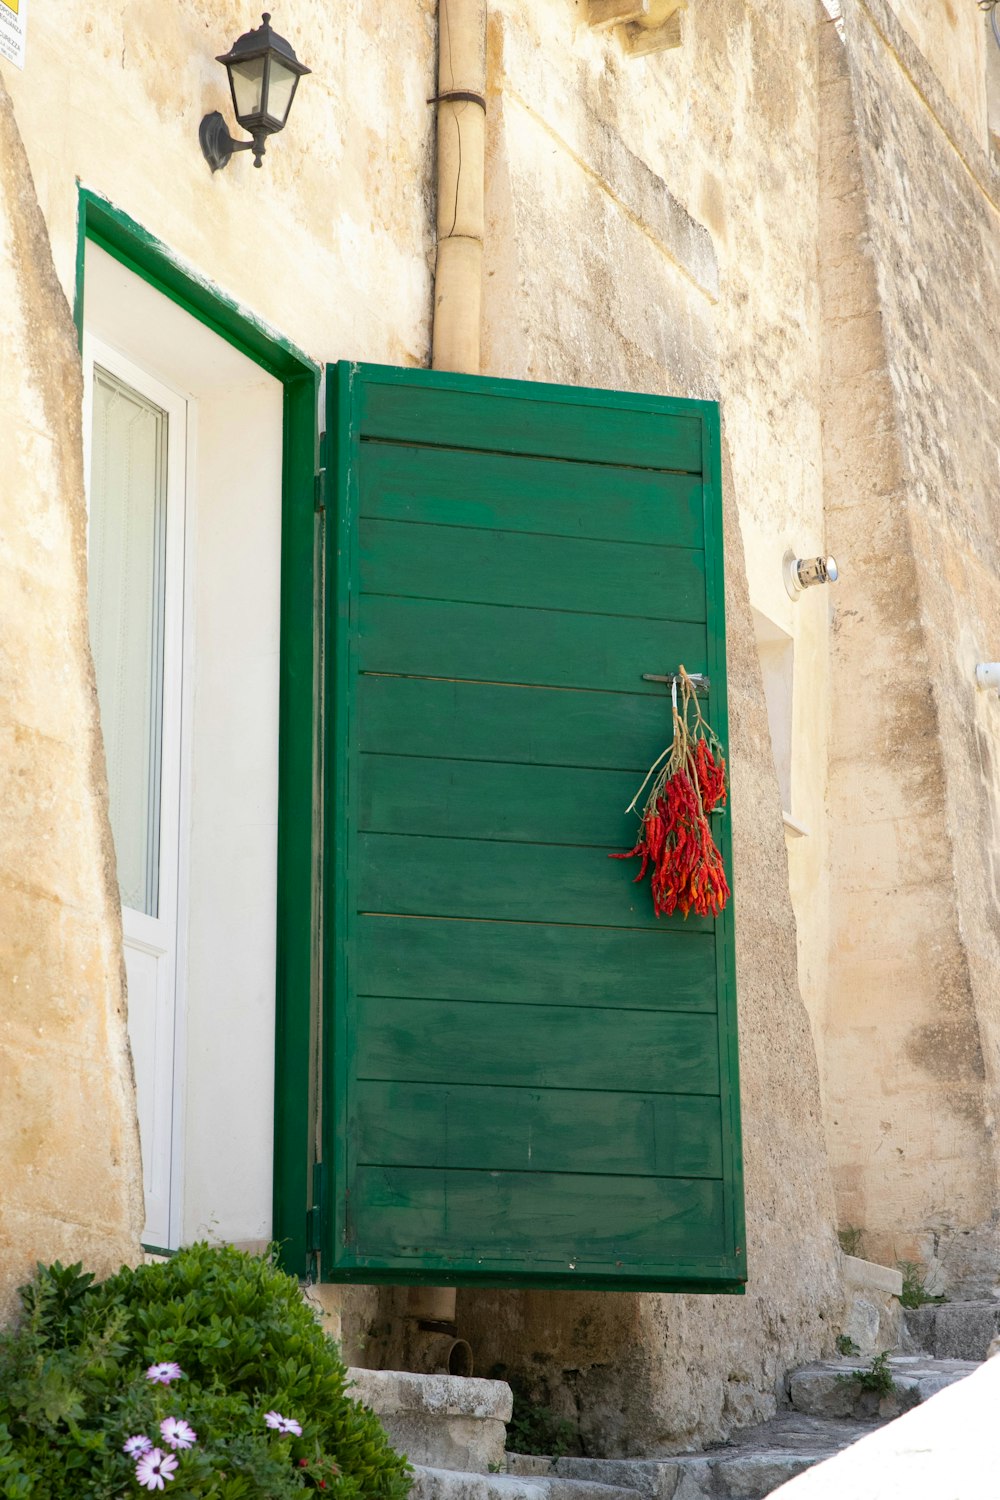 red and white mop leaning on green wooden door